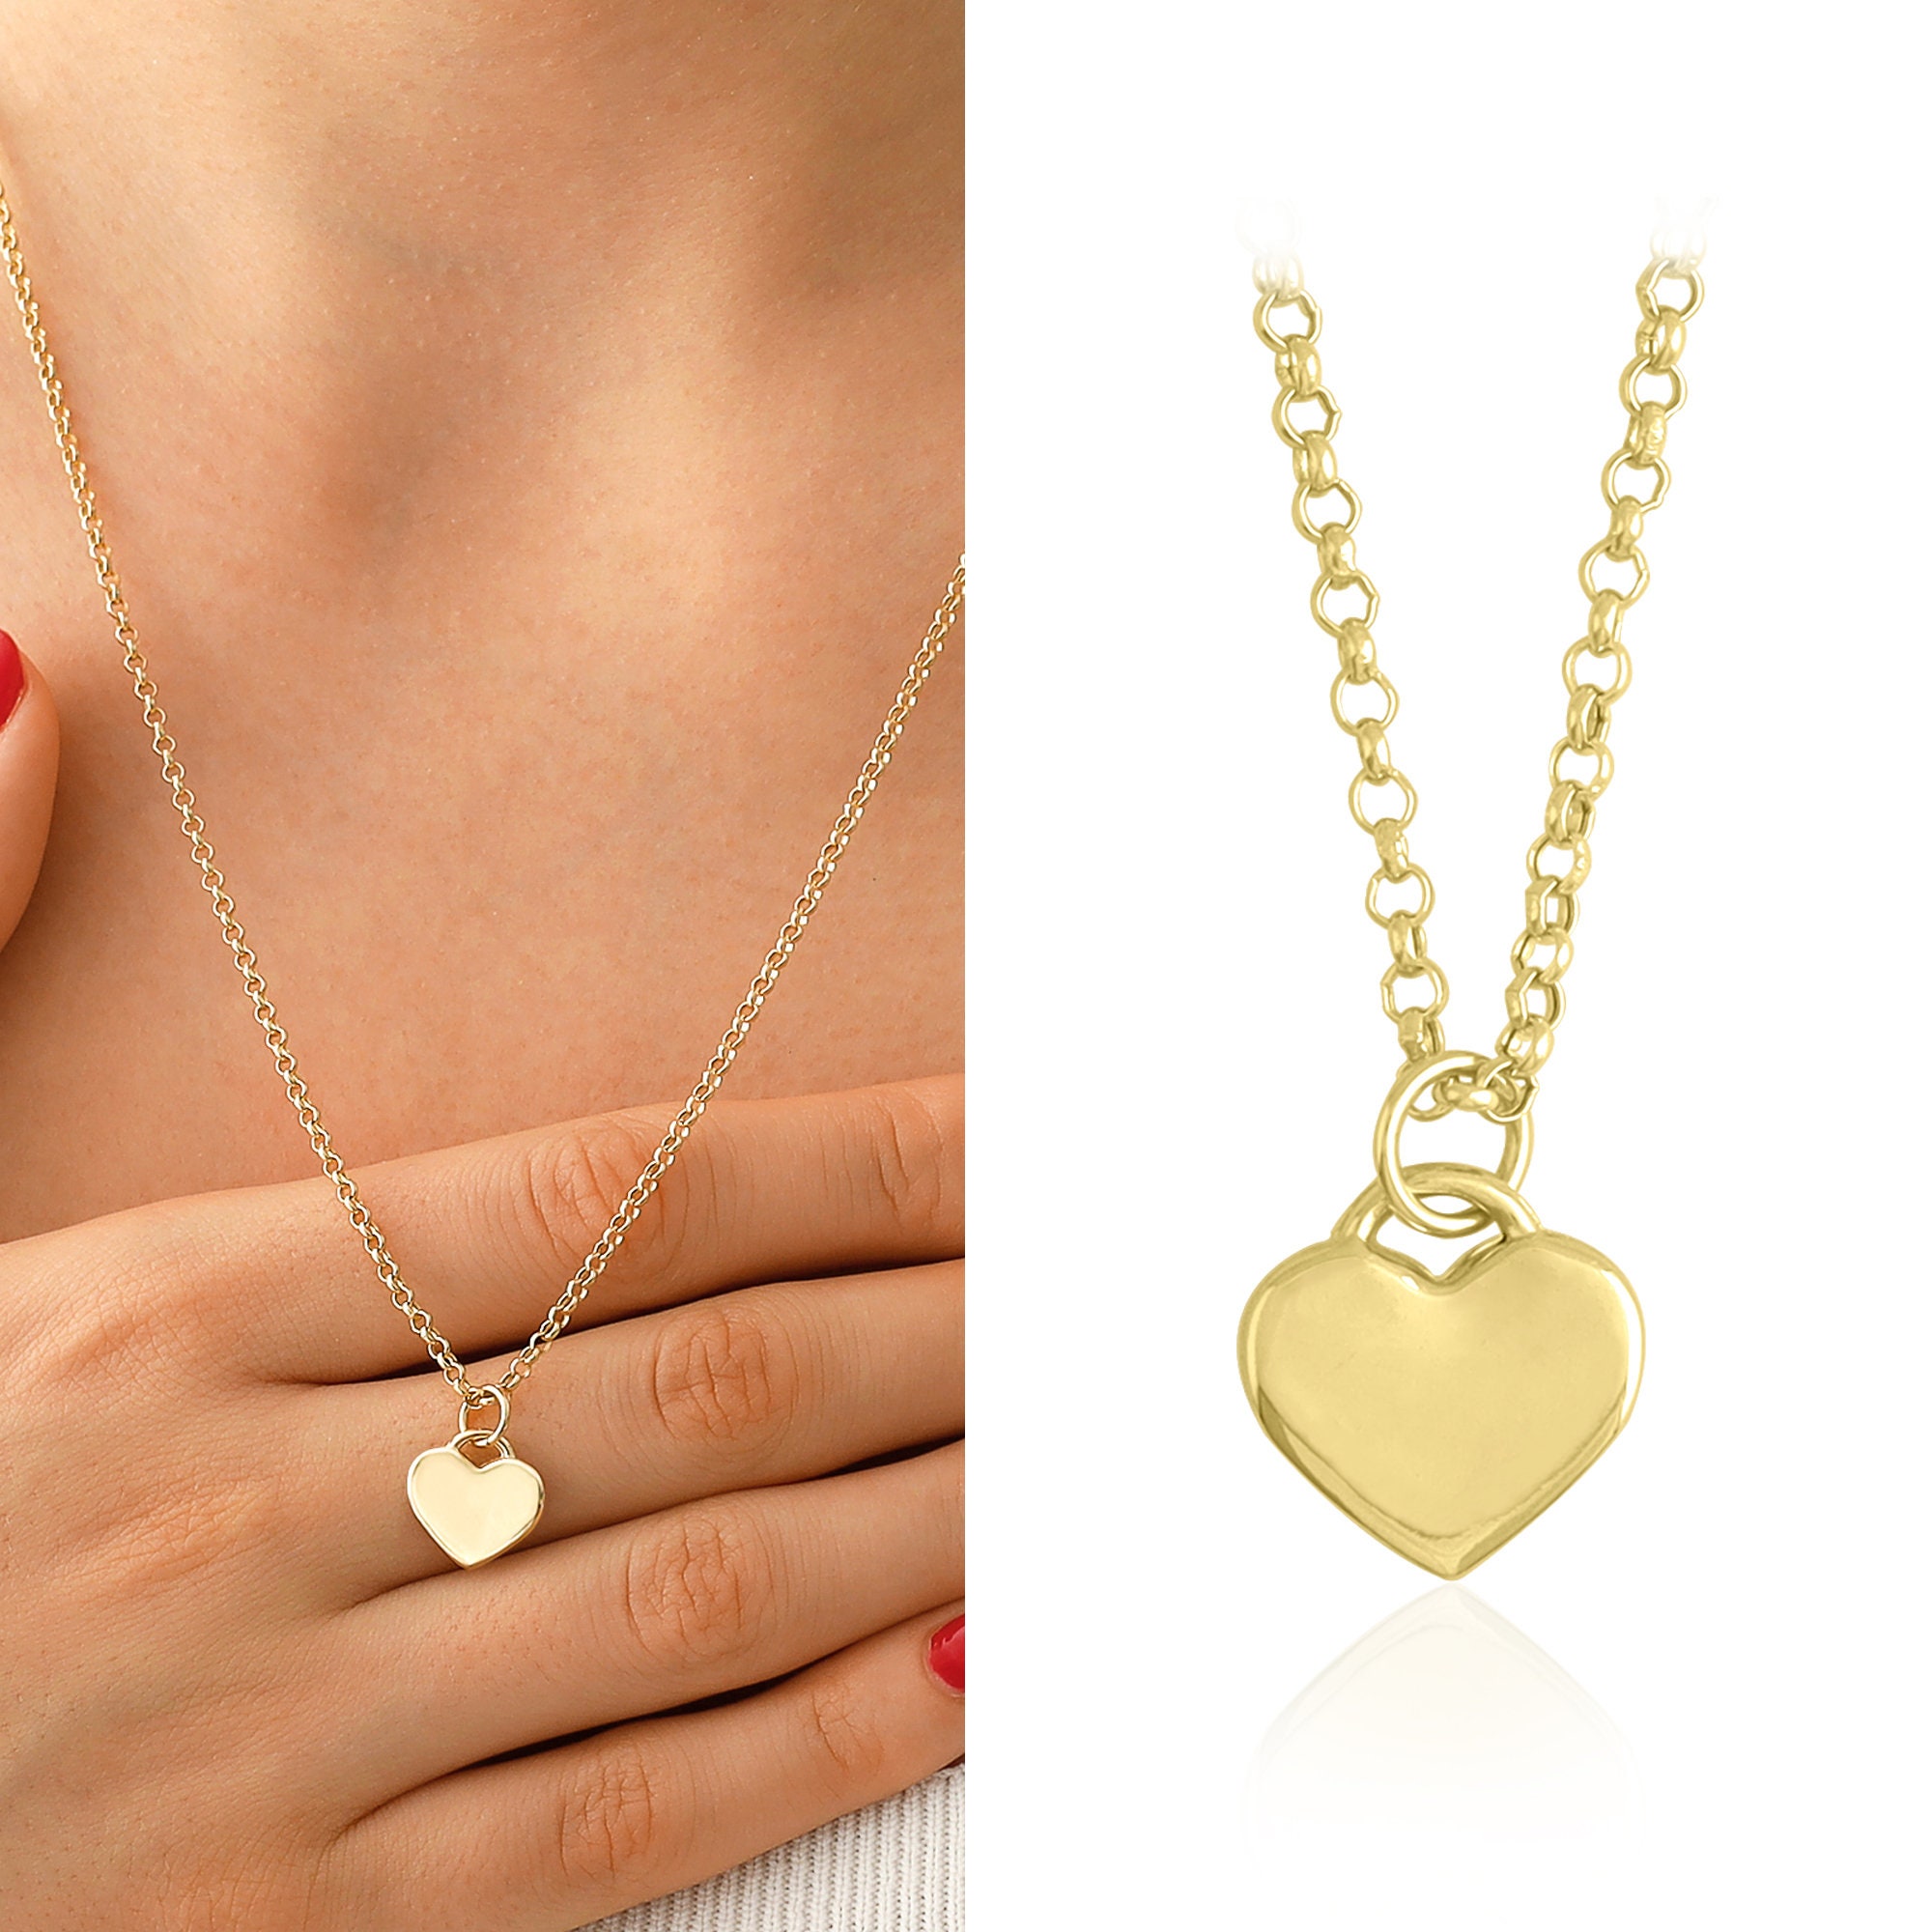 Engravable Large Flat Heart Pendant with Adelaide Chain in 14K Gold